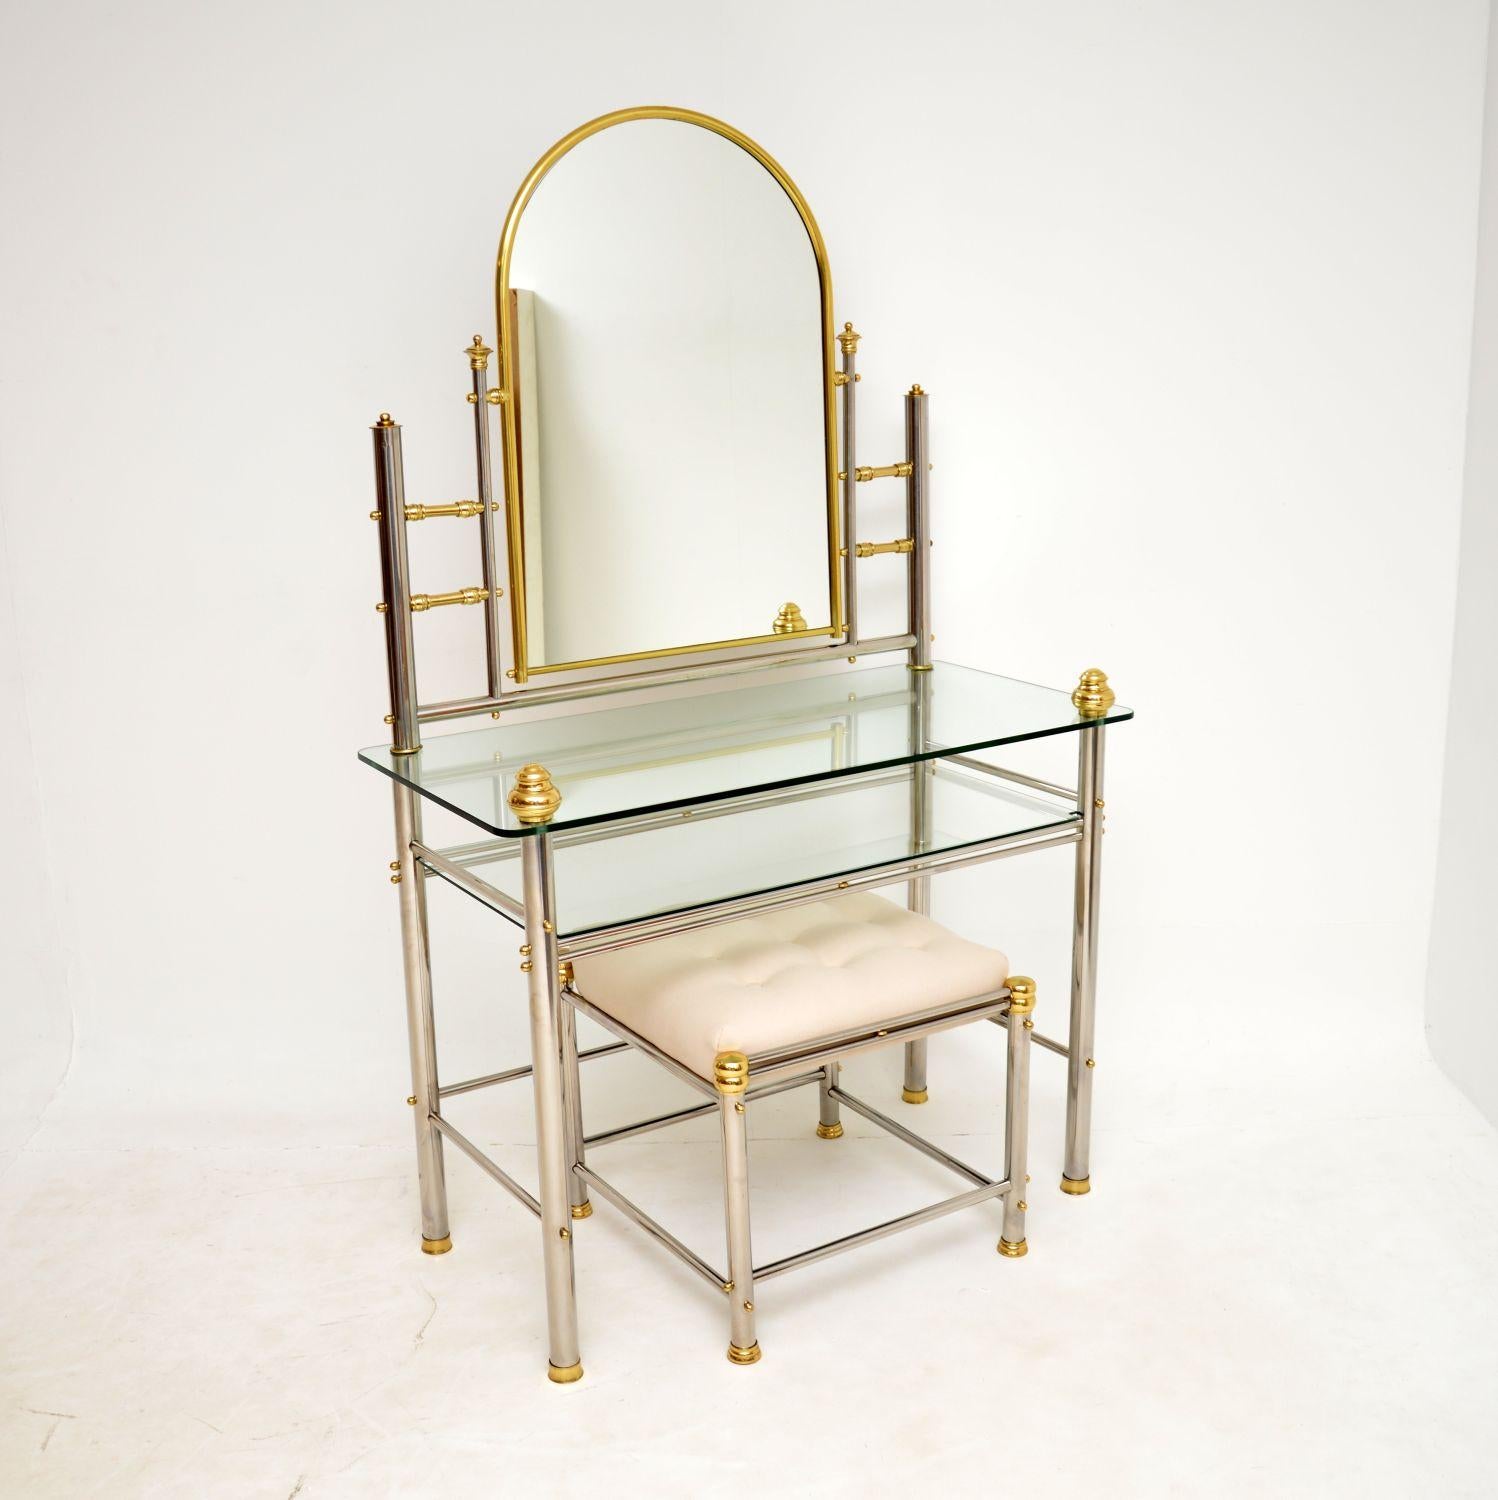 A very stylish vintage dressing table and matching stool. This was made in Italy, it dates from around the 1970s.

The quality is fantastic, this is very well made and has a great design, made from a combination of brass and chrome. It is large,